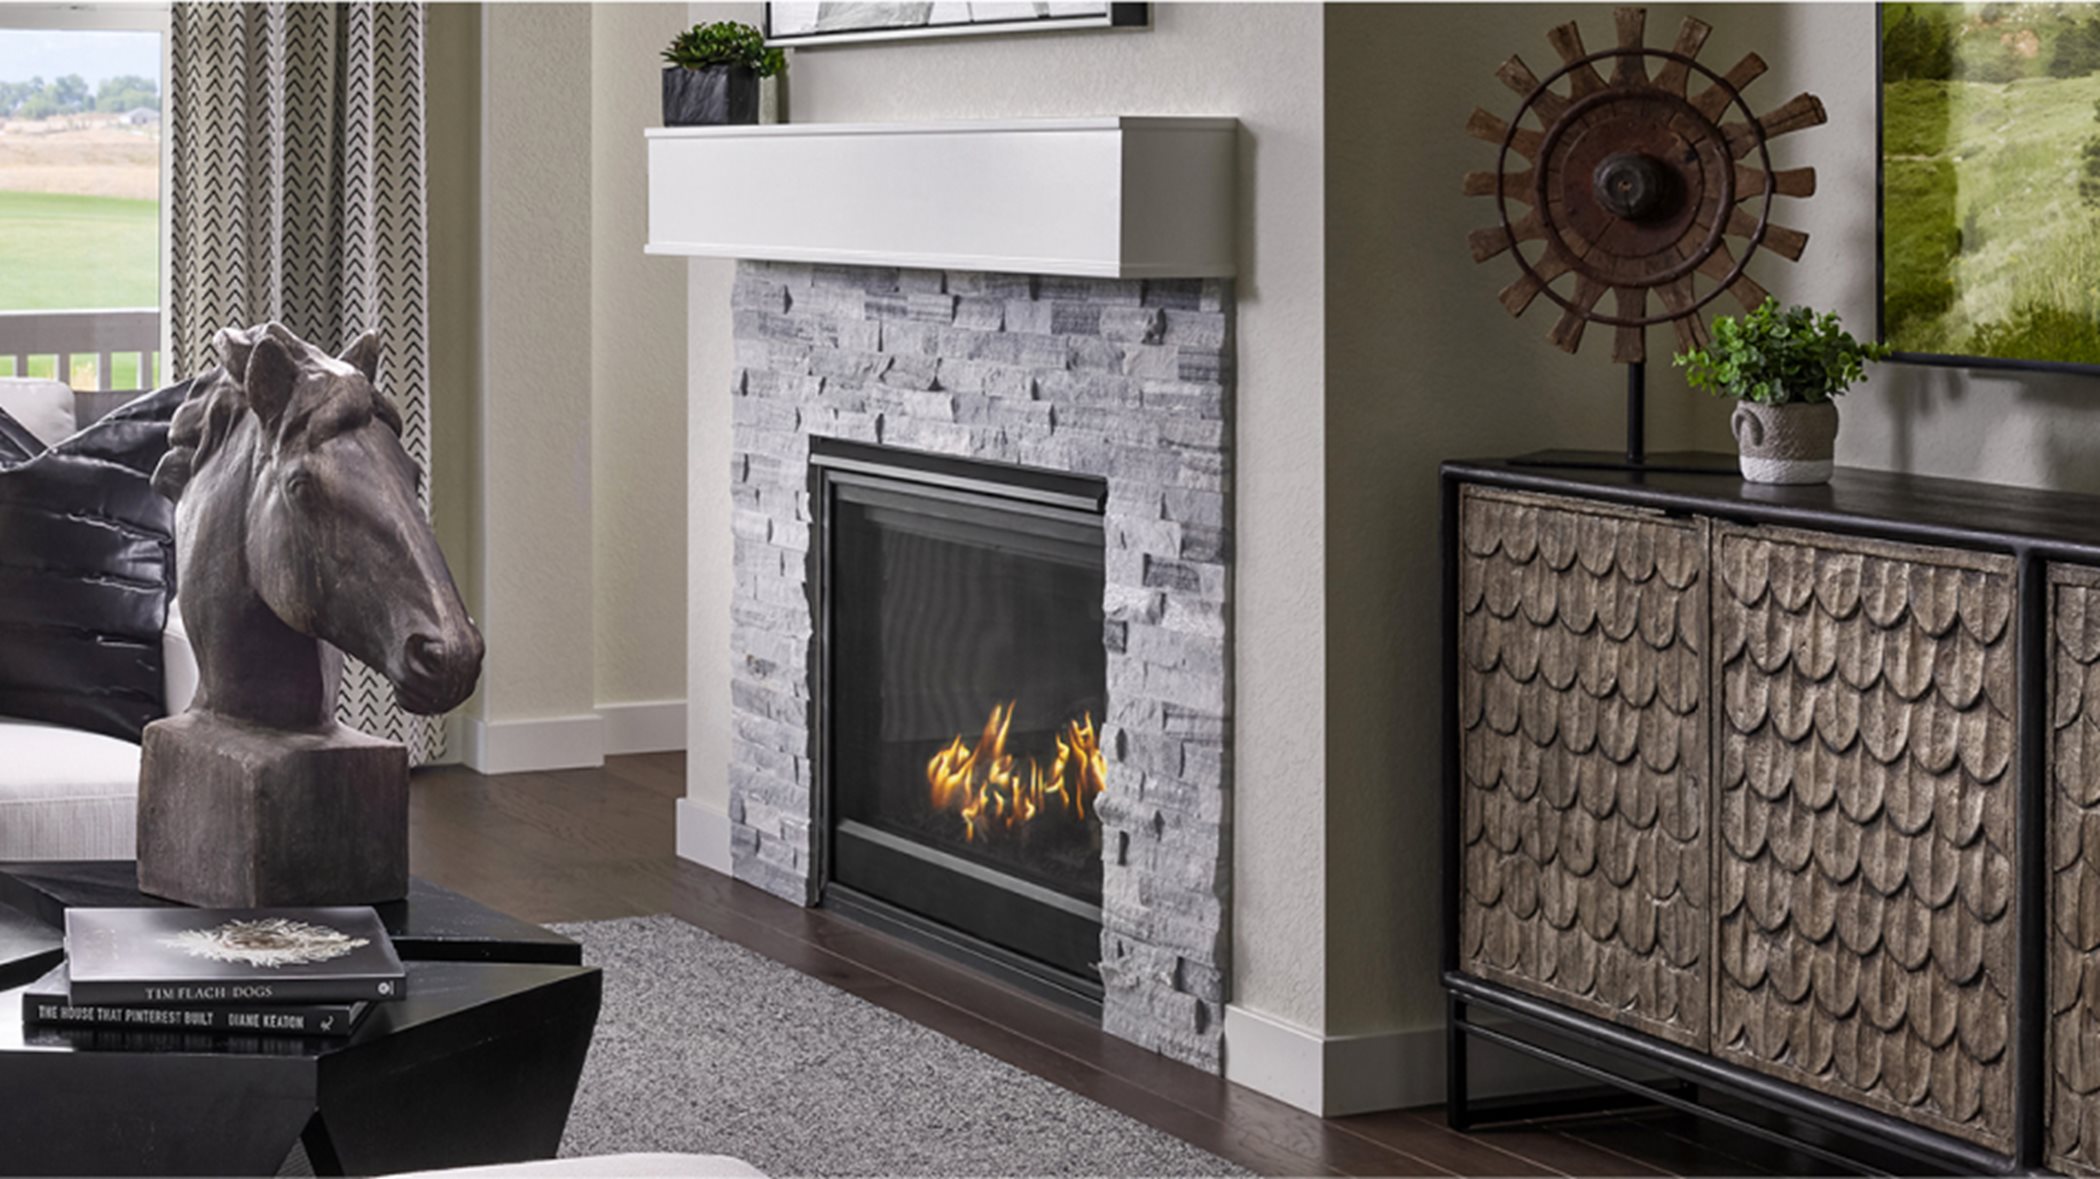 Fireplace with stone surround